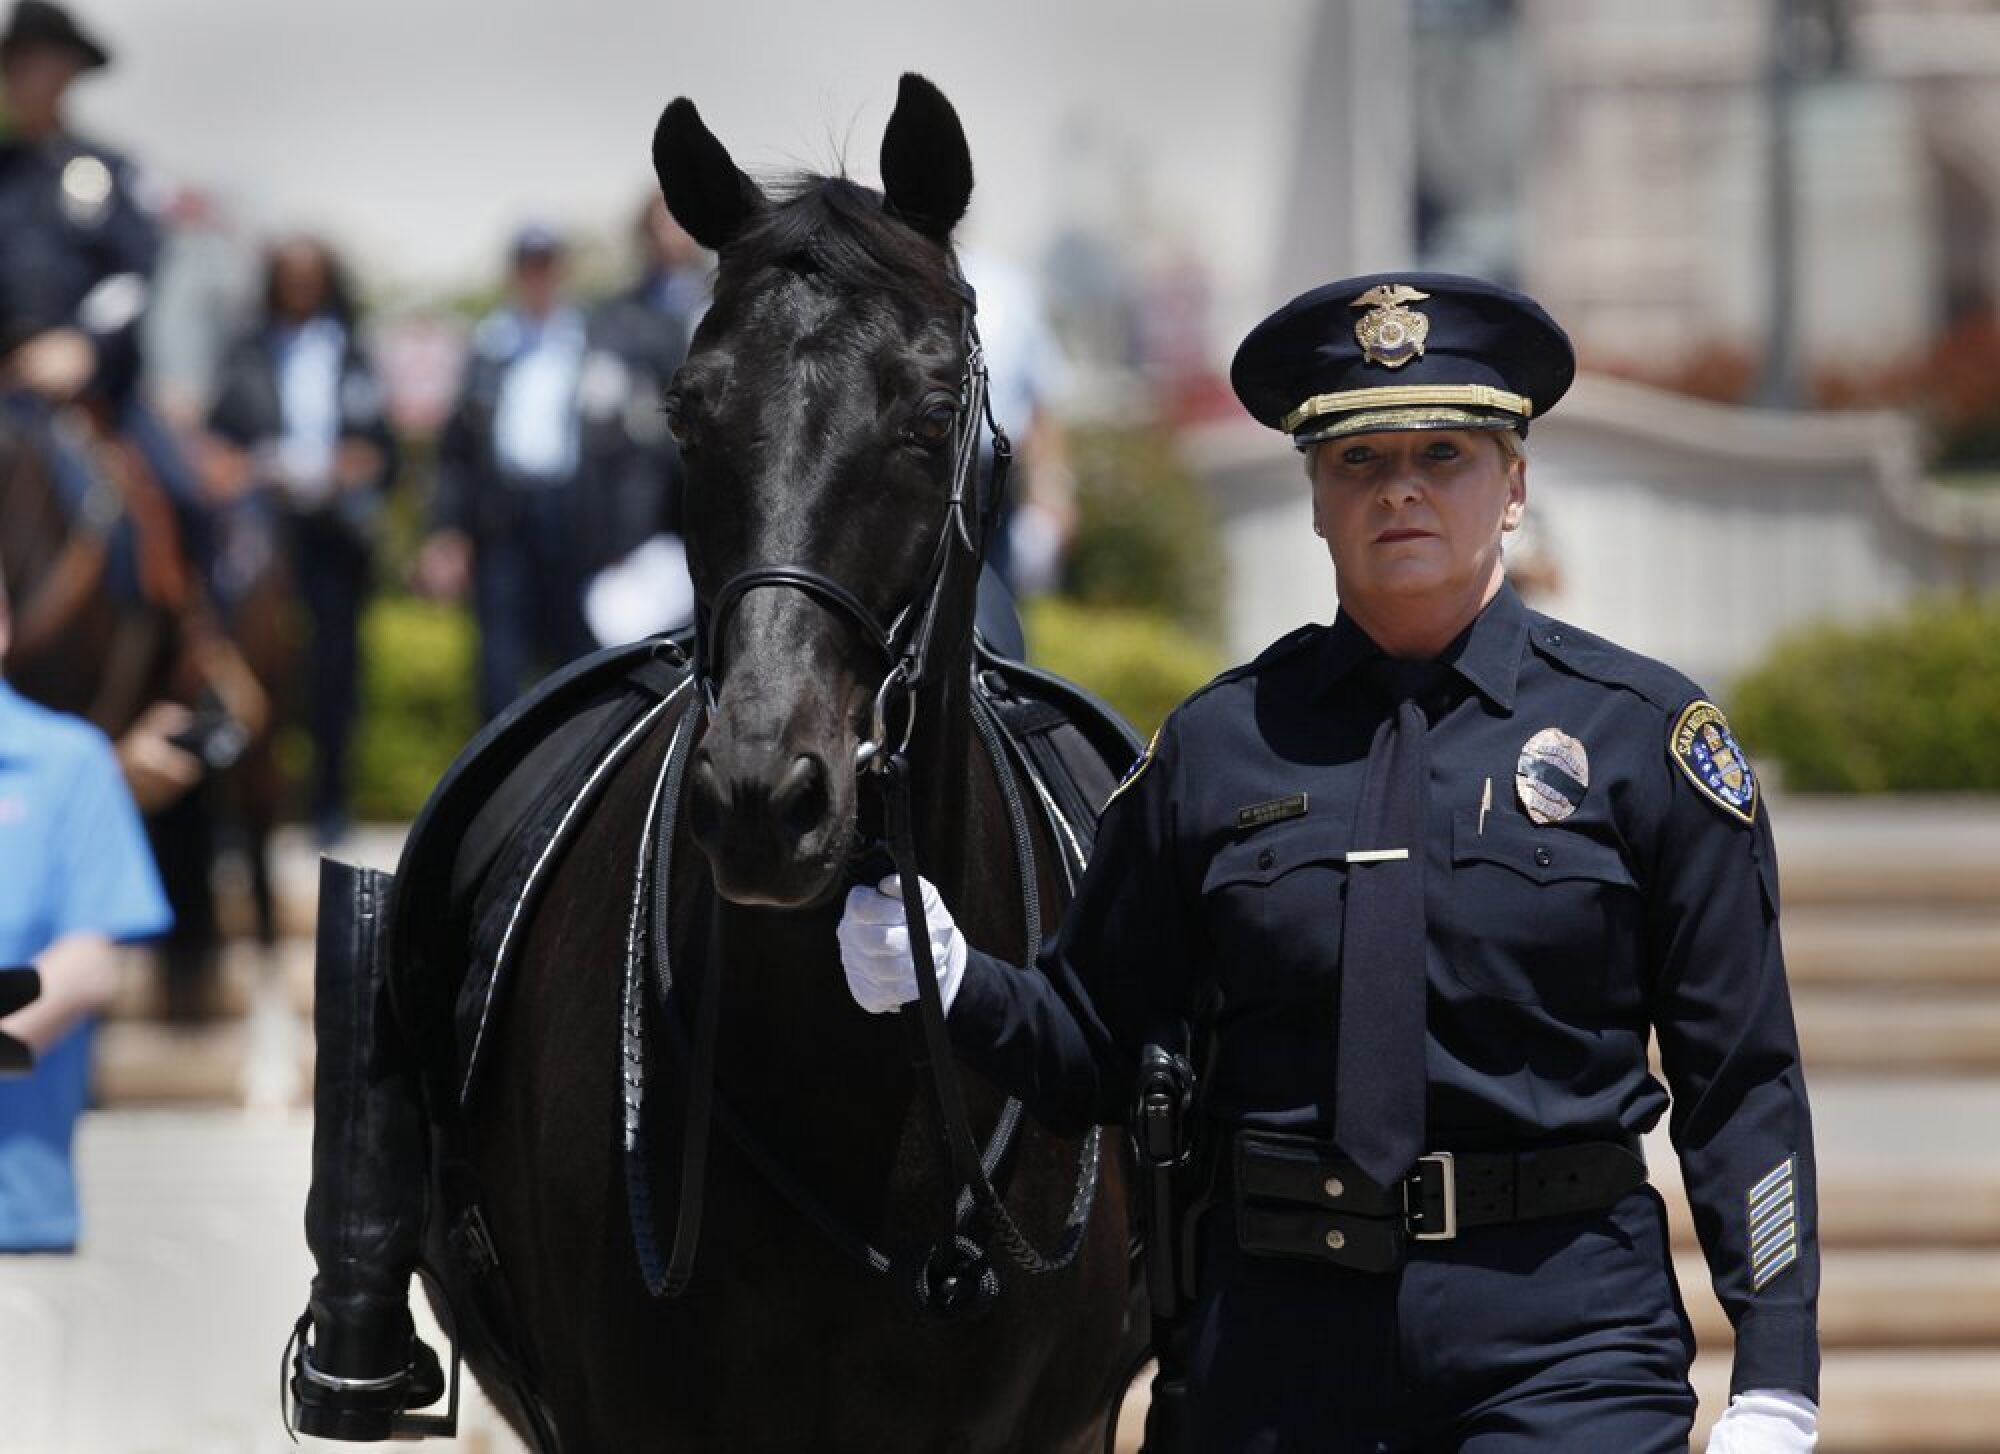 Then-Police Detective Maura Mekenas-Parga leads a police horse at a ceremony for a fallen officer.